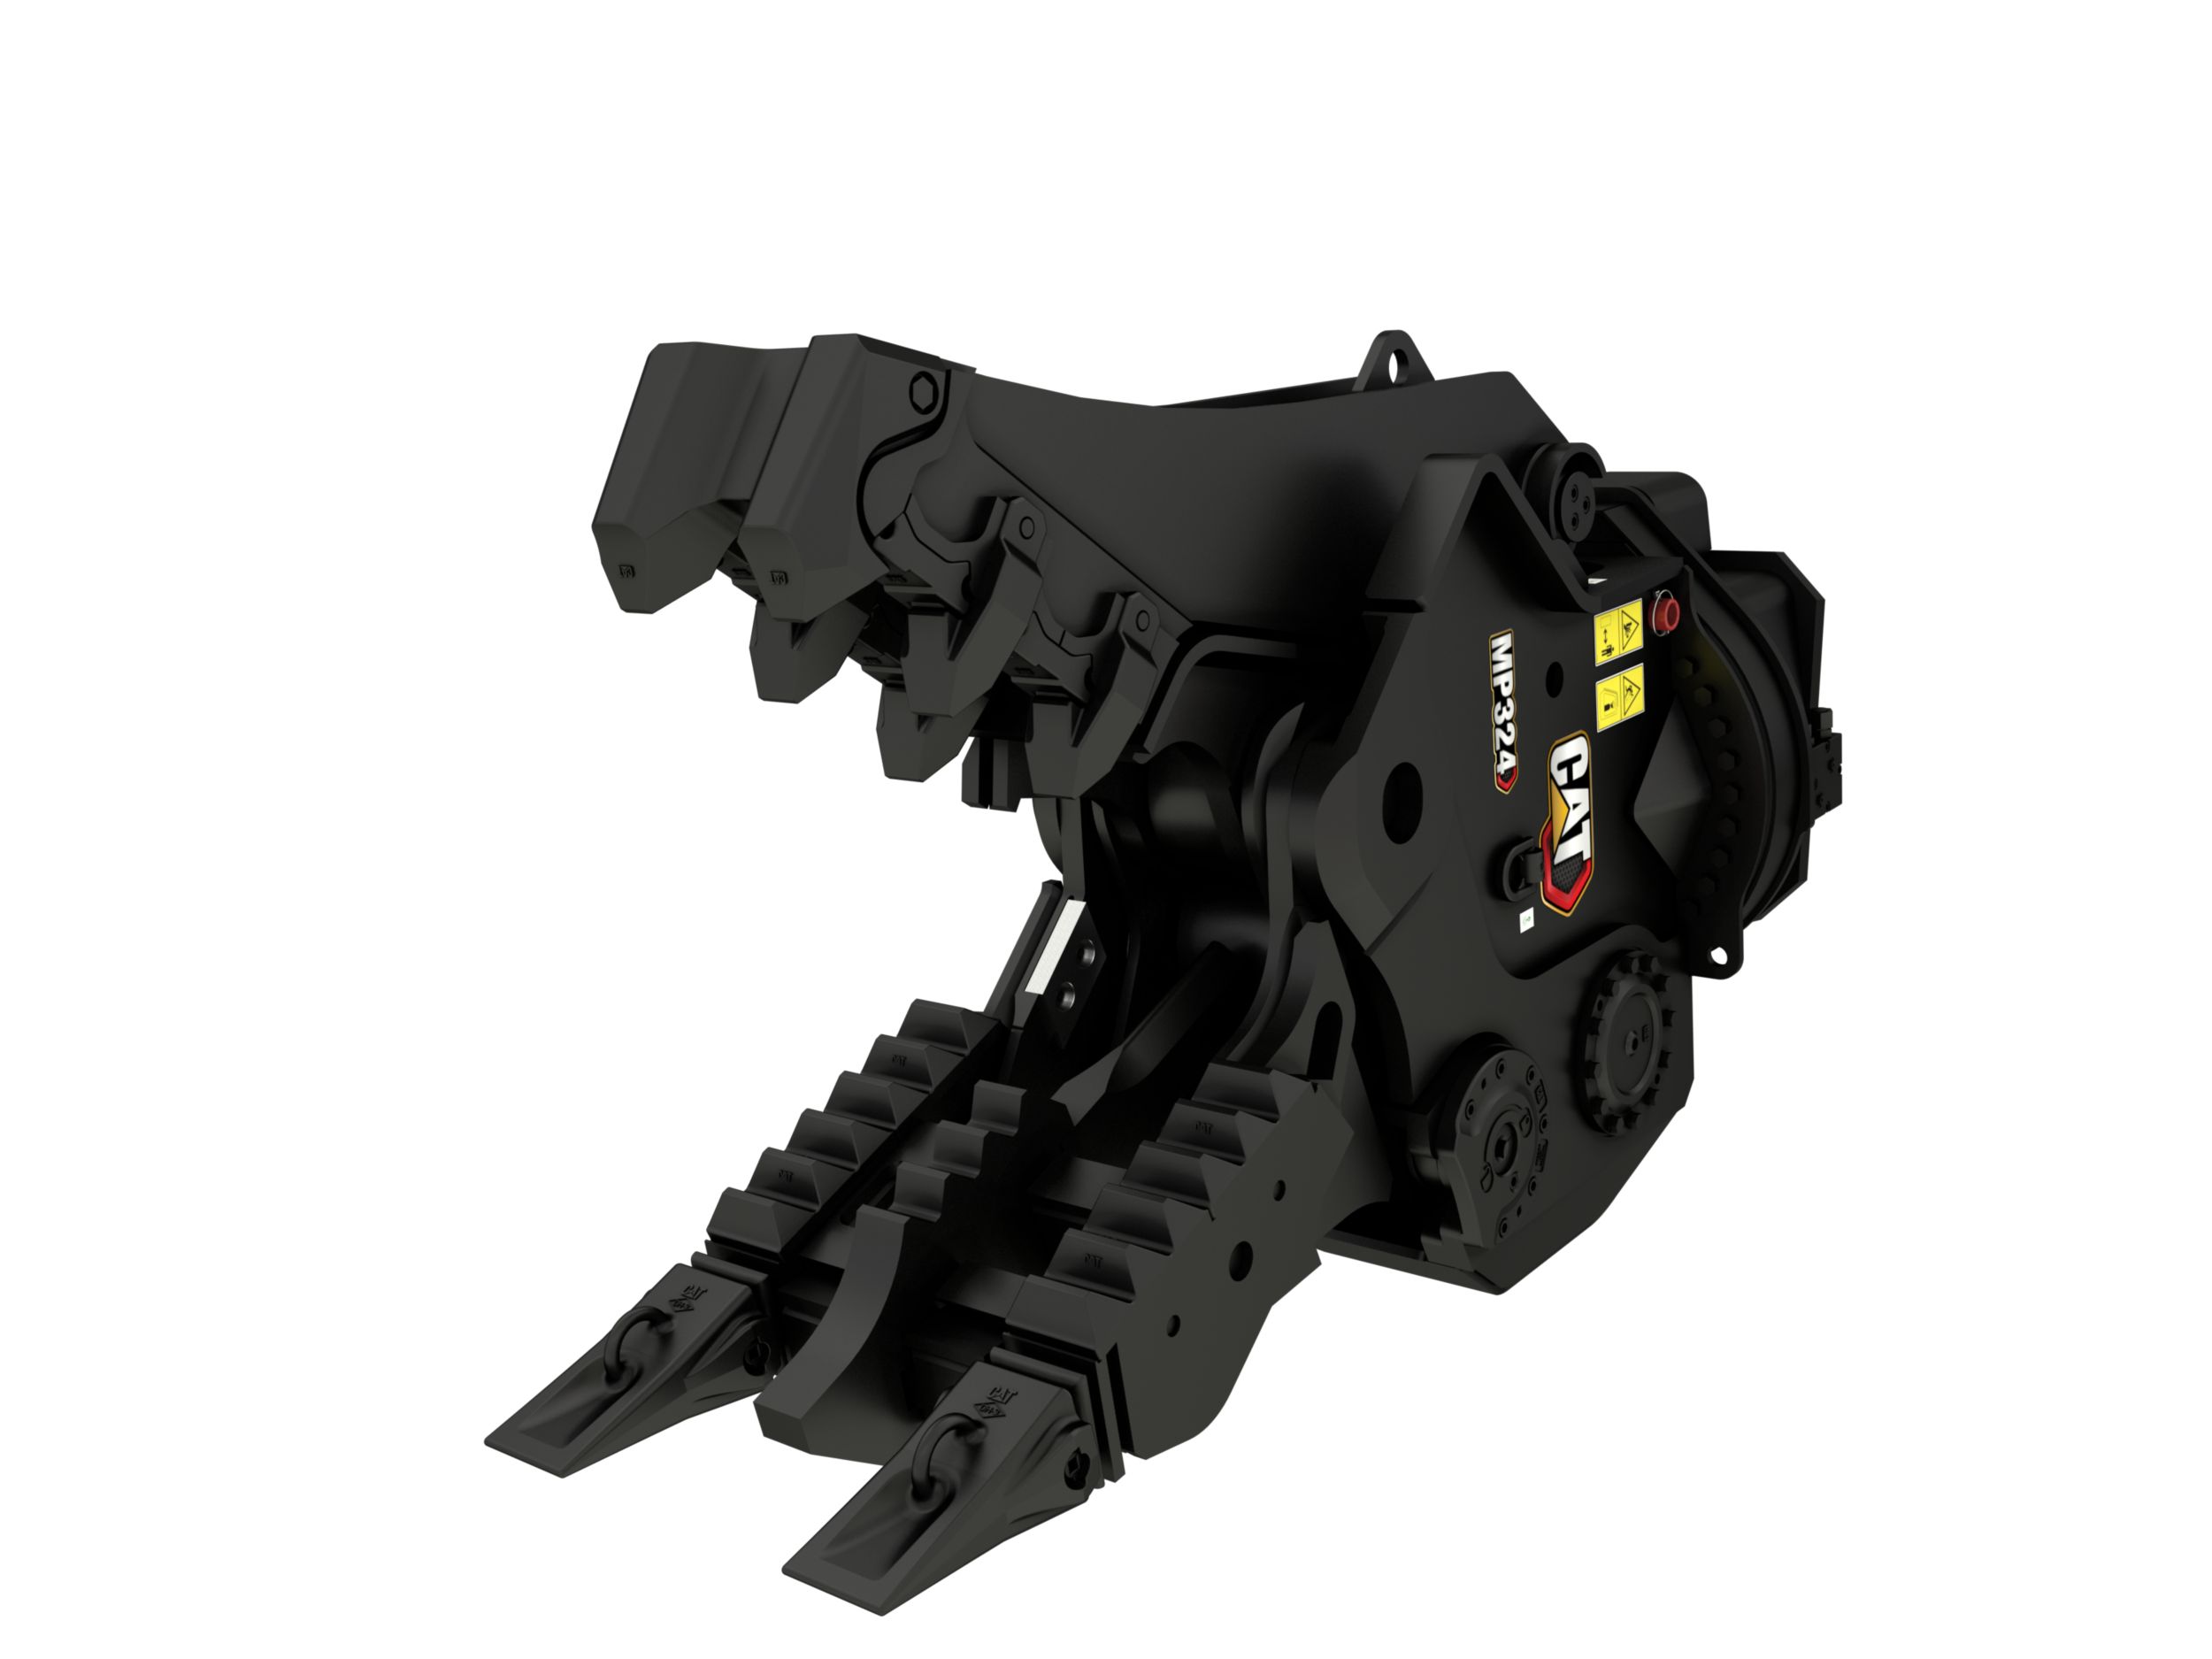 MP324 Secondary Pulverizer Jaw